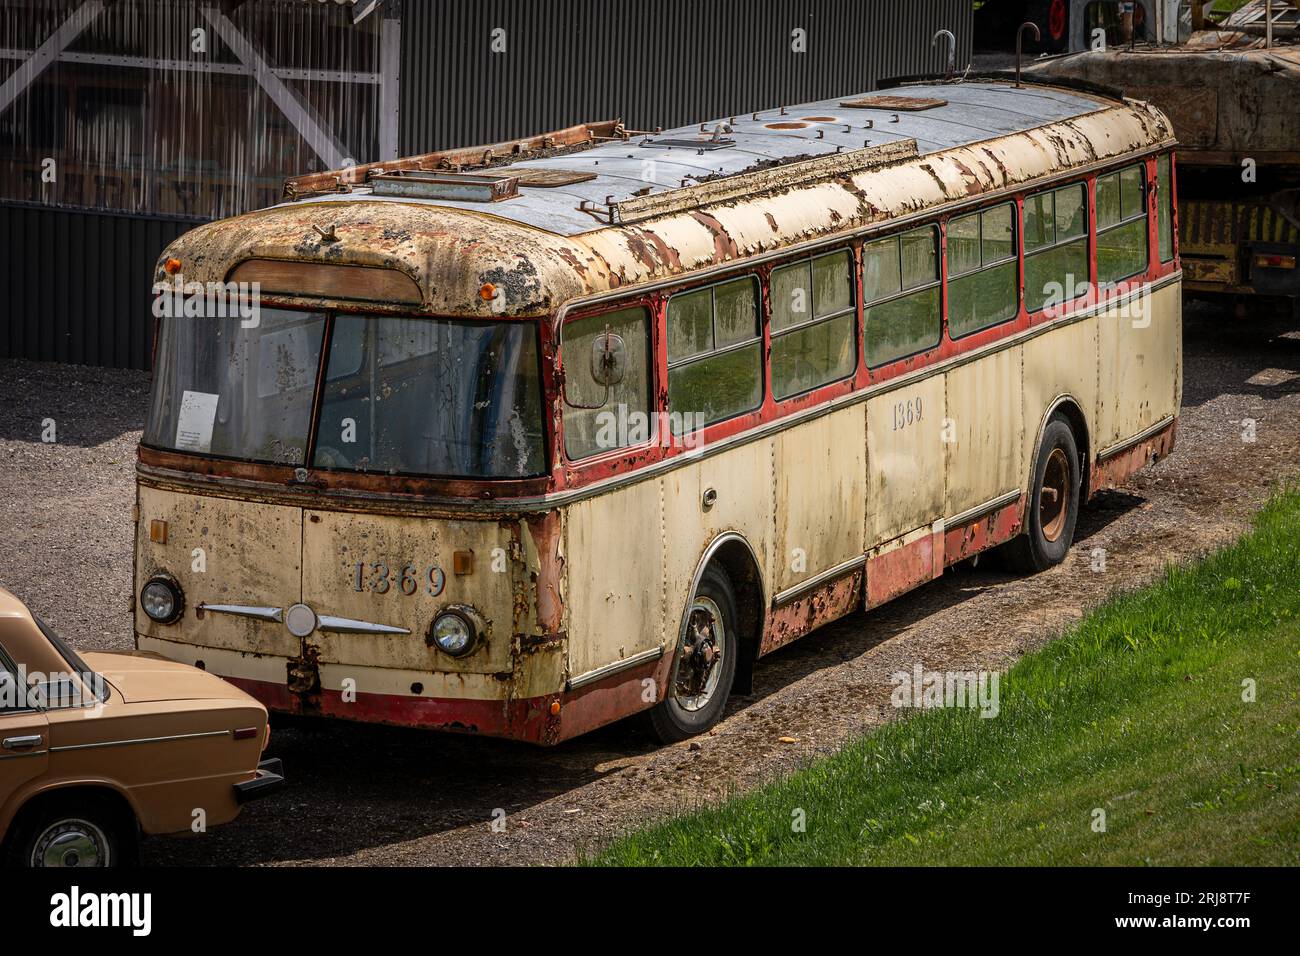 Abandoned rust covered trolleybus or bus Stock Photo